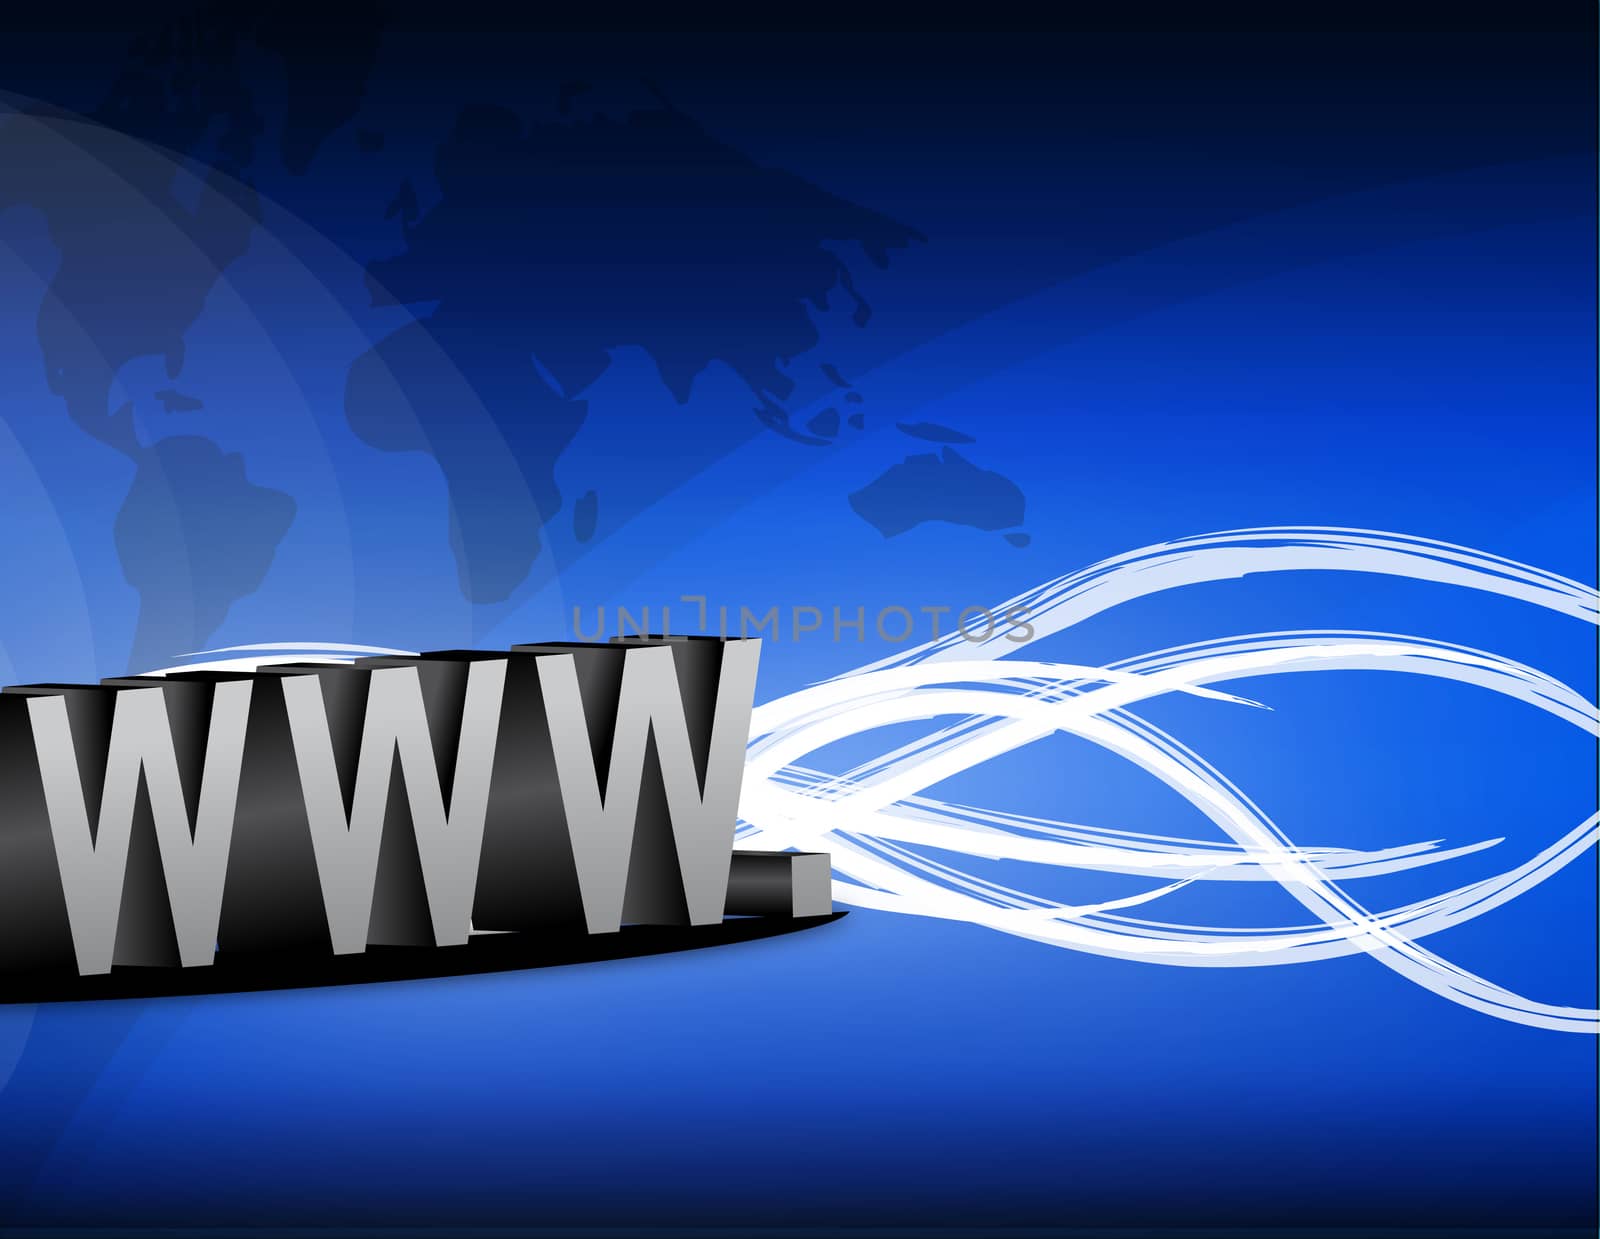 www Internet and wires background by alexmillos